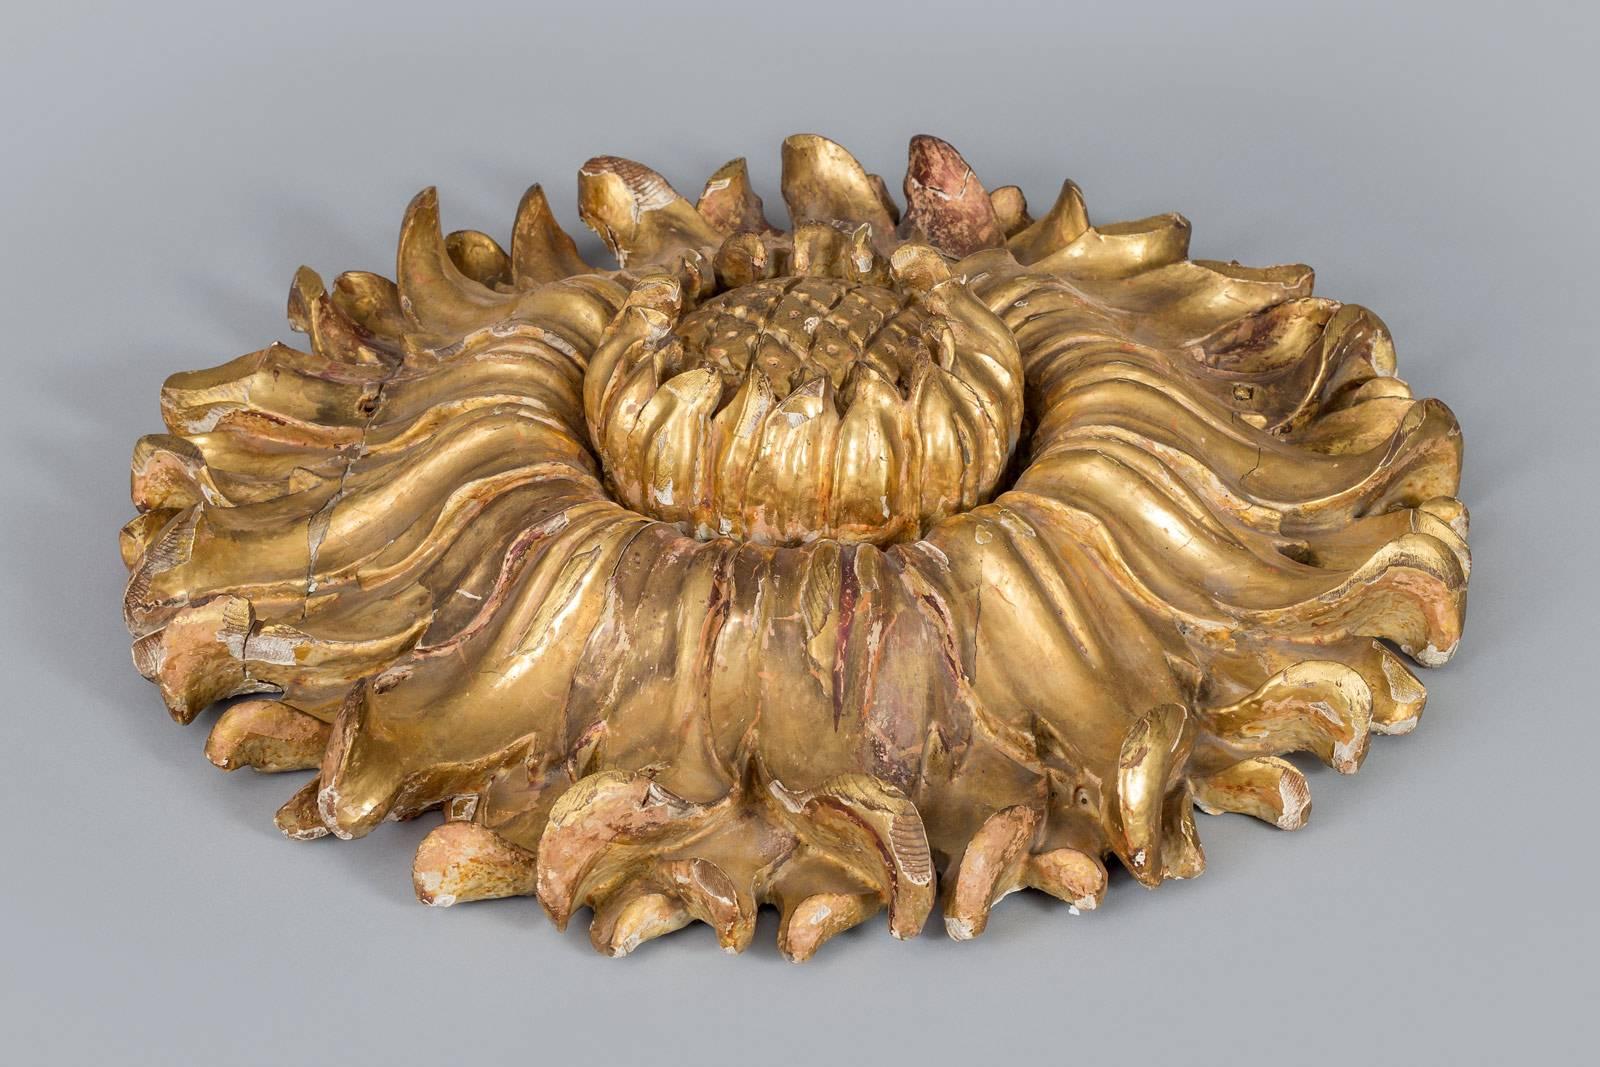 Italian 18th century carved and gilded sculpture in the form of a sunflower. Can be used as a ceiling rosette or medallion.